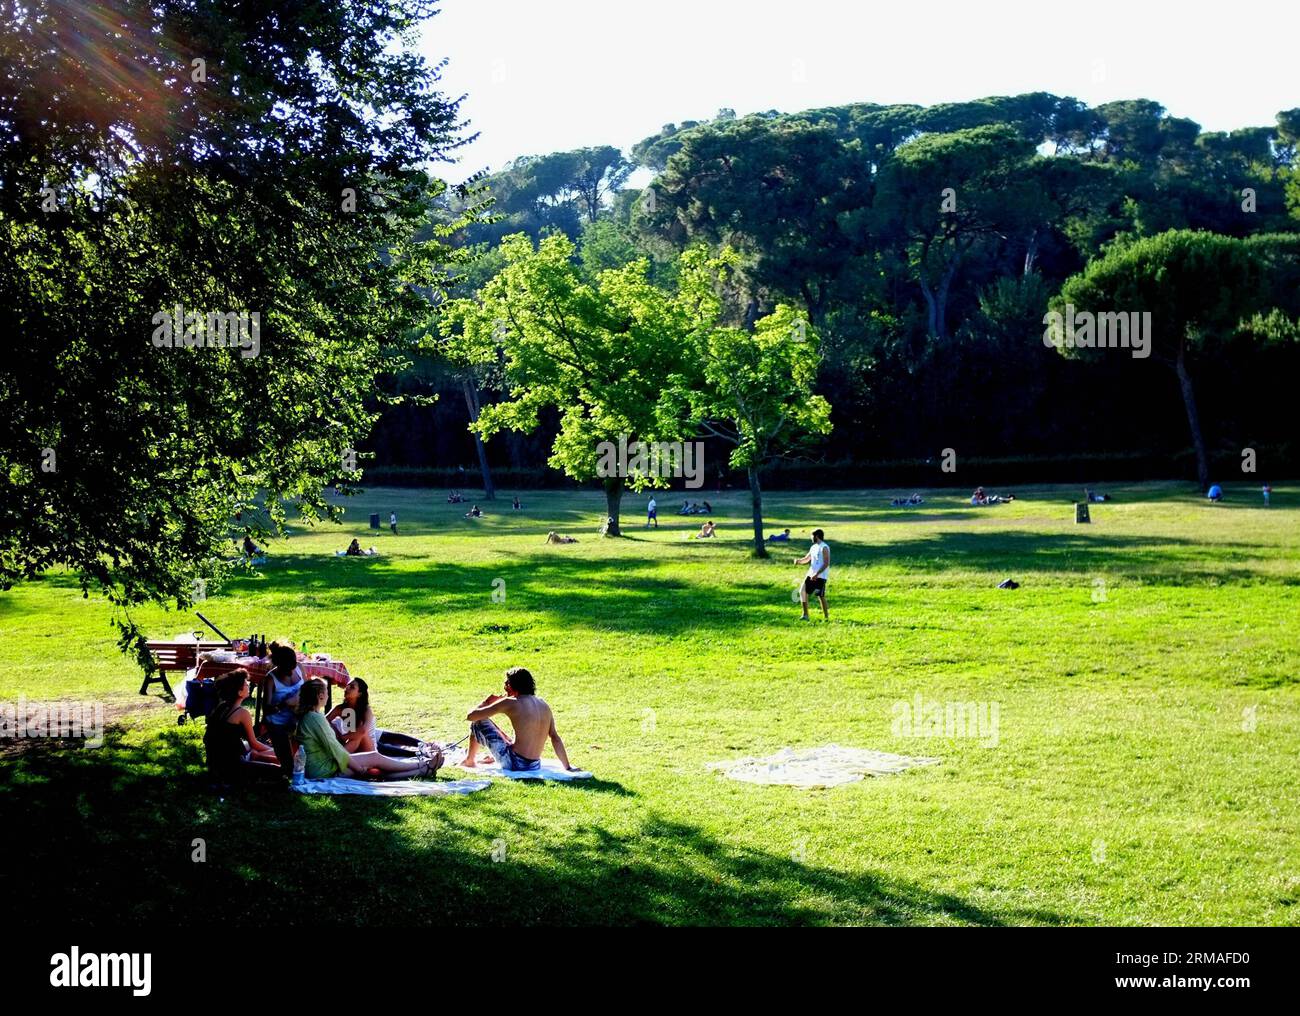 (140706) -- ROME, July 6, 2014 (Xinhua) -- People have picnic in Villa Ada park in Rome, Italy, on July 6, 2014. (Xinhua/Xu Nizhi) ITALY-ROME-SUMMER PUBLICATIONxNOTxINxCHN   Rome July 6 2014 XINHUA Celebrities have Picnic in Villa Ada Park in Rome Italy ON July 6 2014 XINHUA Xu Nizhi Italy Rome Summer PUBLICATIONxNOTxINxCHN Stock Photo